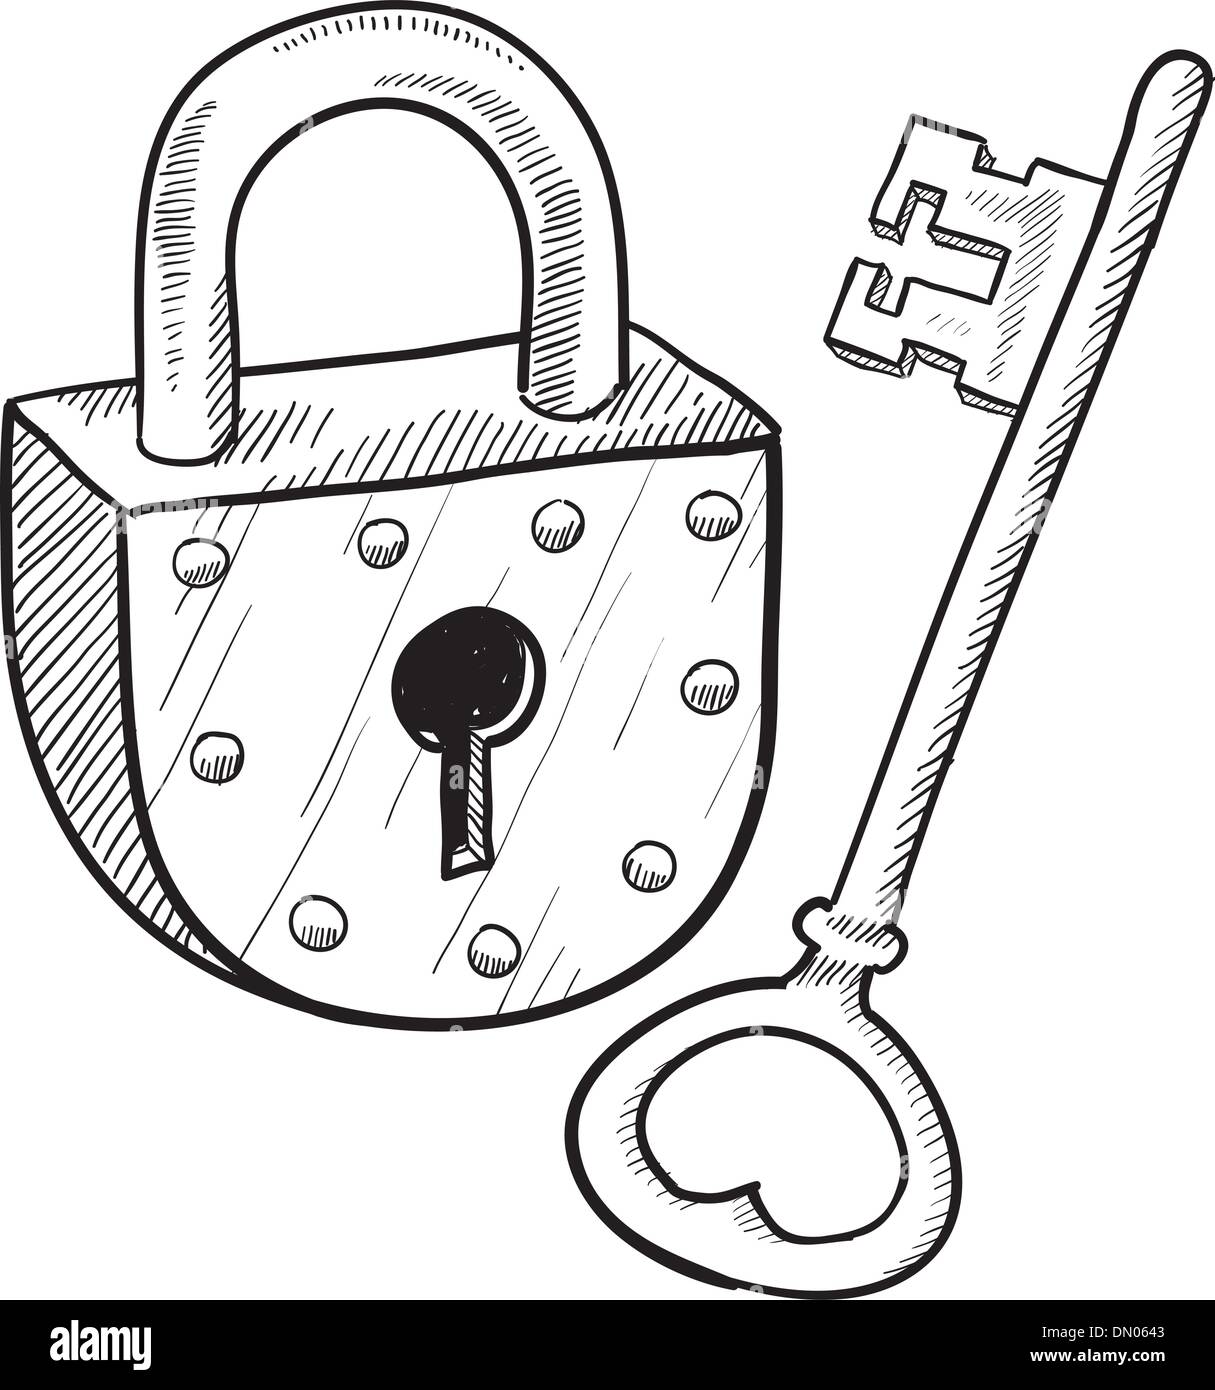 Handdrawn lock and key illustration  free image by rawpixelcom  Key  drawings Lock drawing How to draw hands